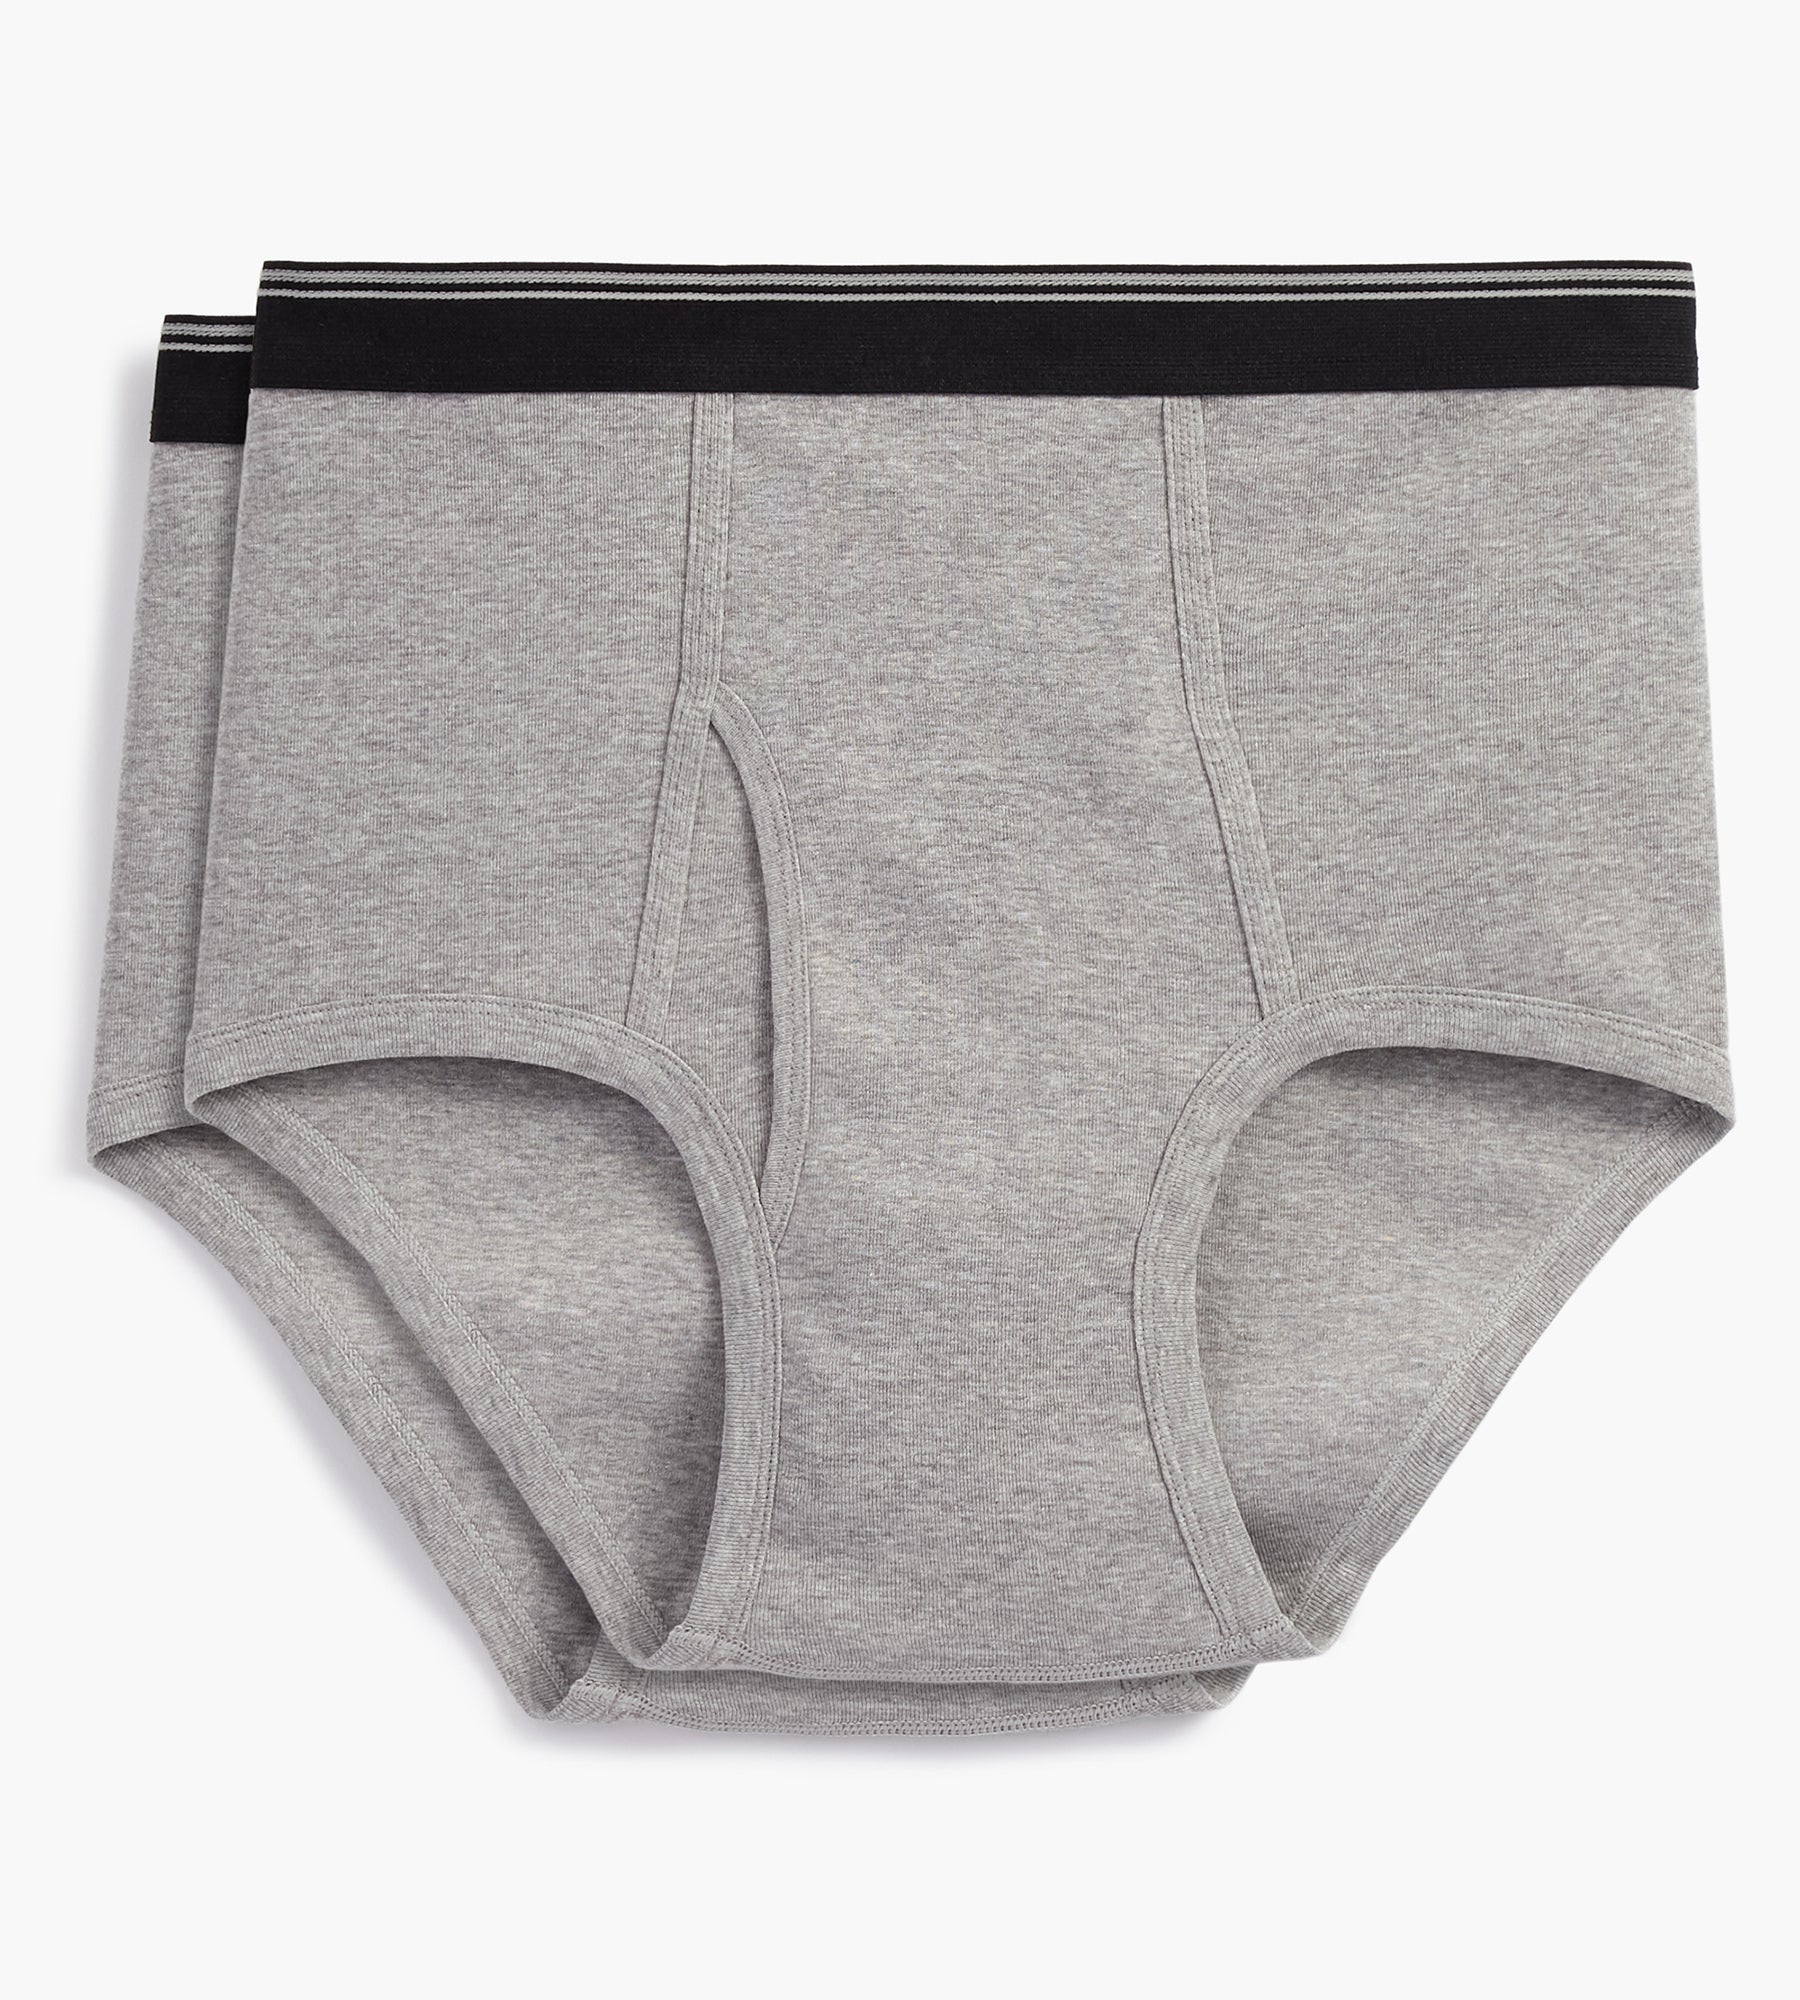  Yuwe Big and Tall Men's Underwear Collection，Men's